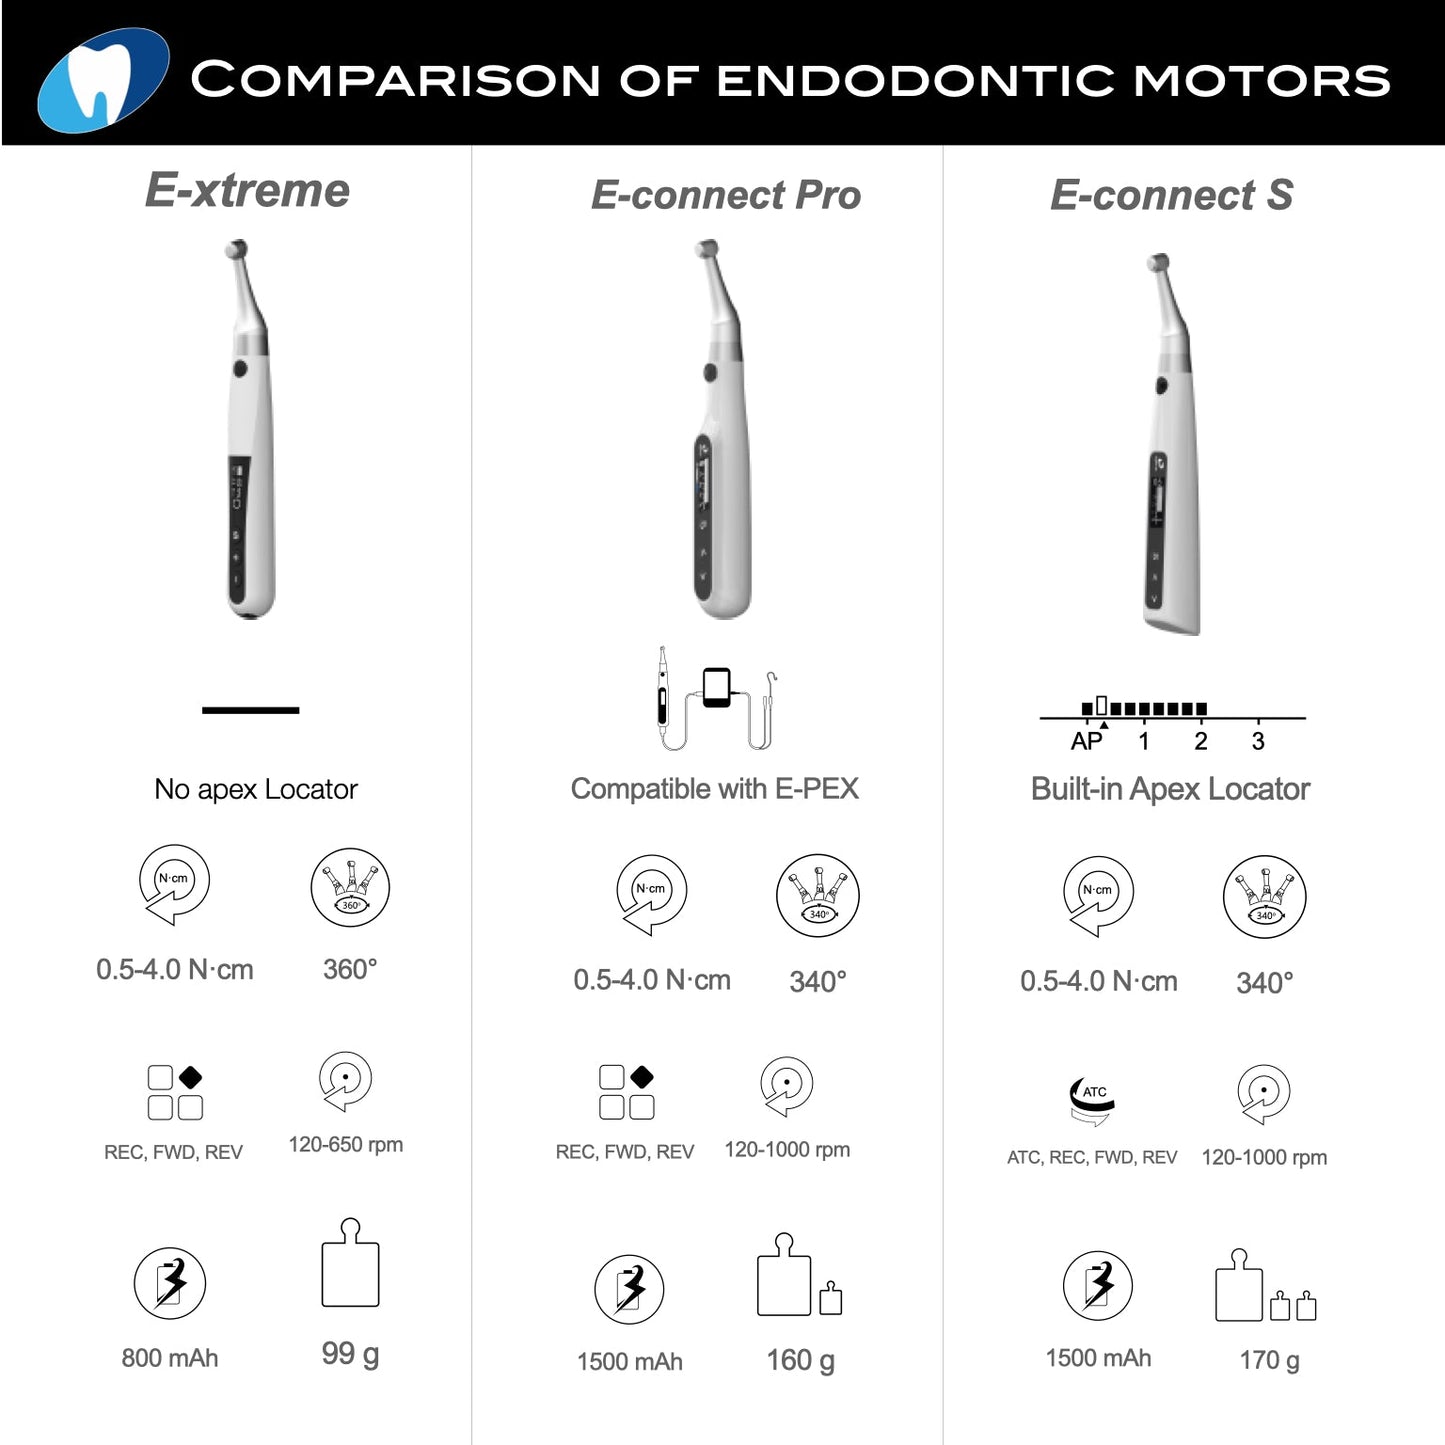 E-Connect S (Endodontic motor with built in apex locator) - Incidental